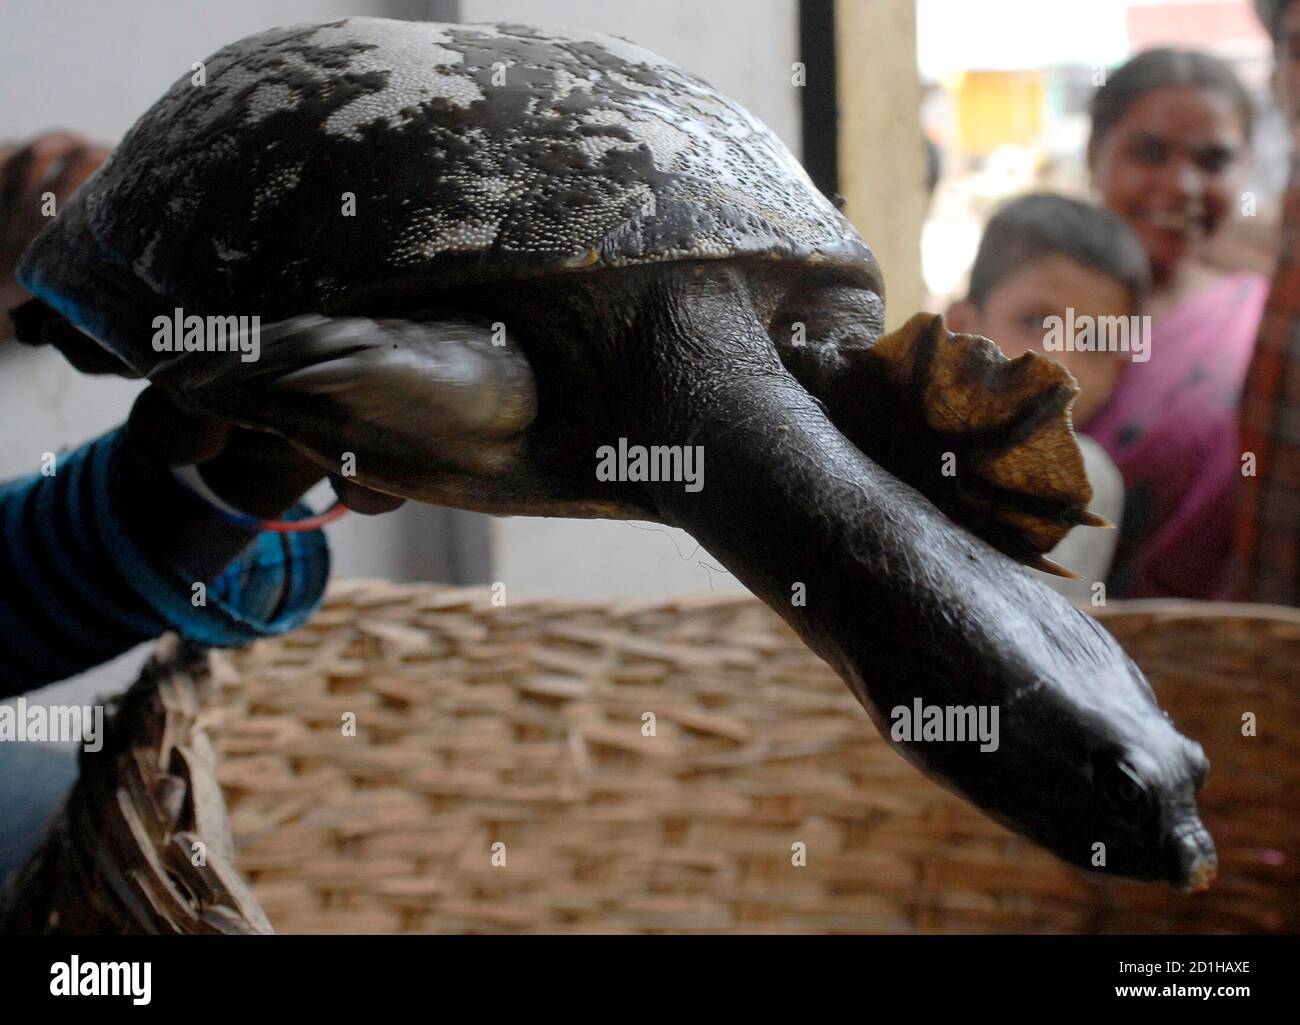 A member of an animal welfare organization holds a rescued soft shell  turtle in the southern Indian city of Hyderabad June 18, 2007. About 26  soft shell turtles were rescued by 'People